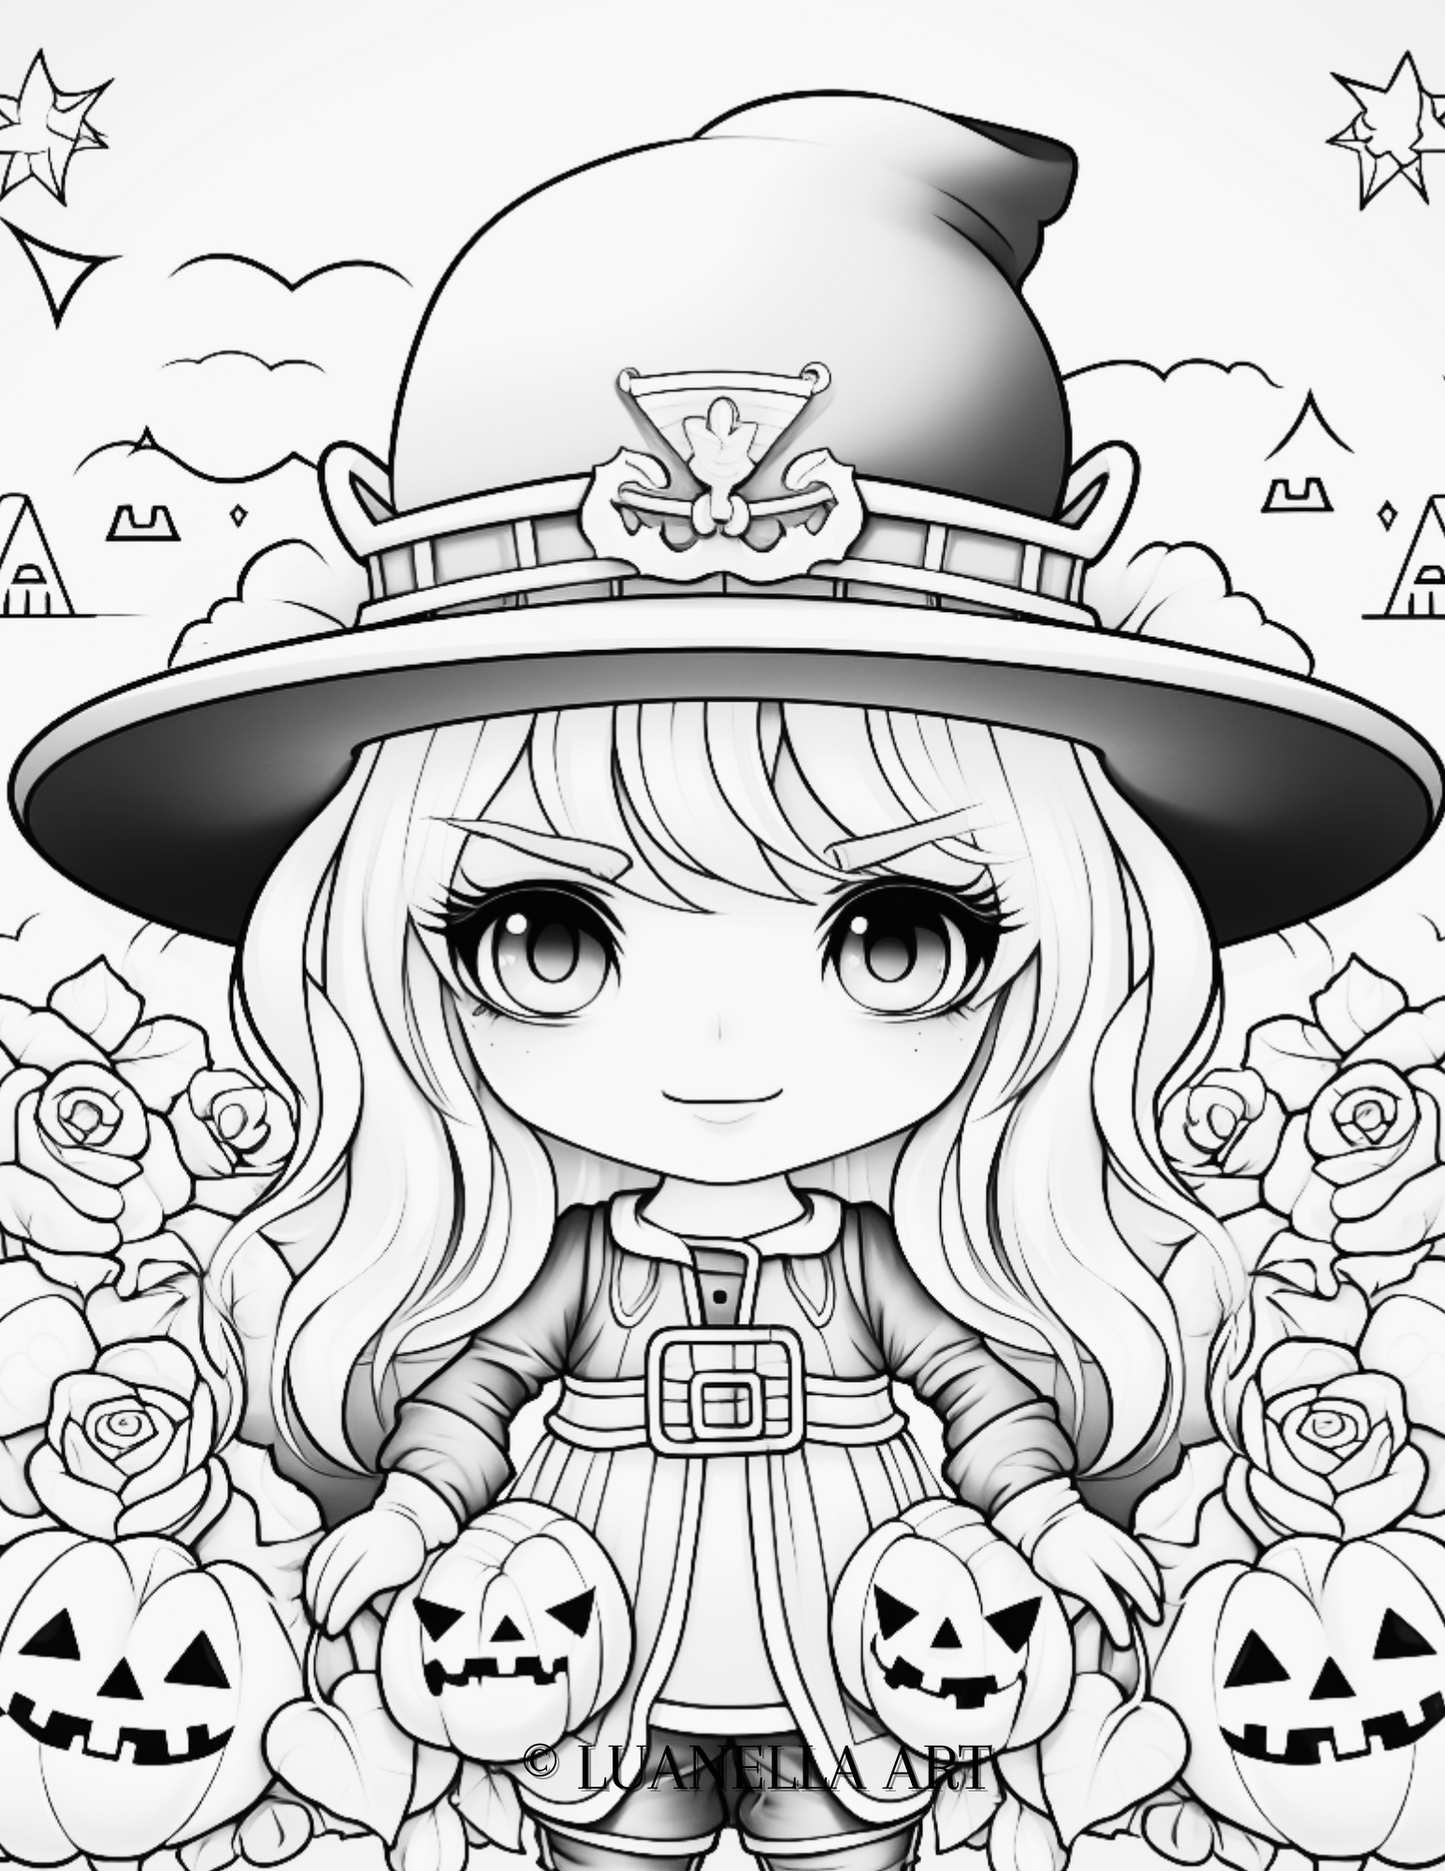 Cute Halloween Witchy Witch with carved pumpkins | Coloring Page | Instant Digital Download